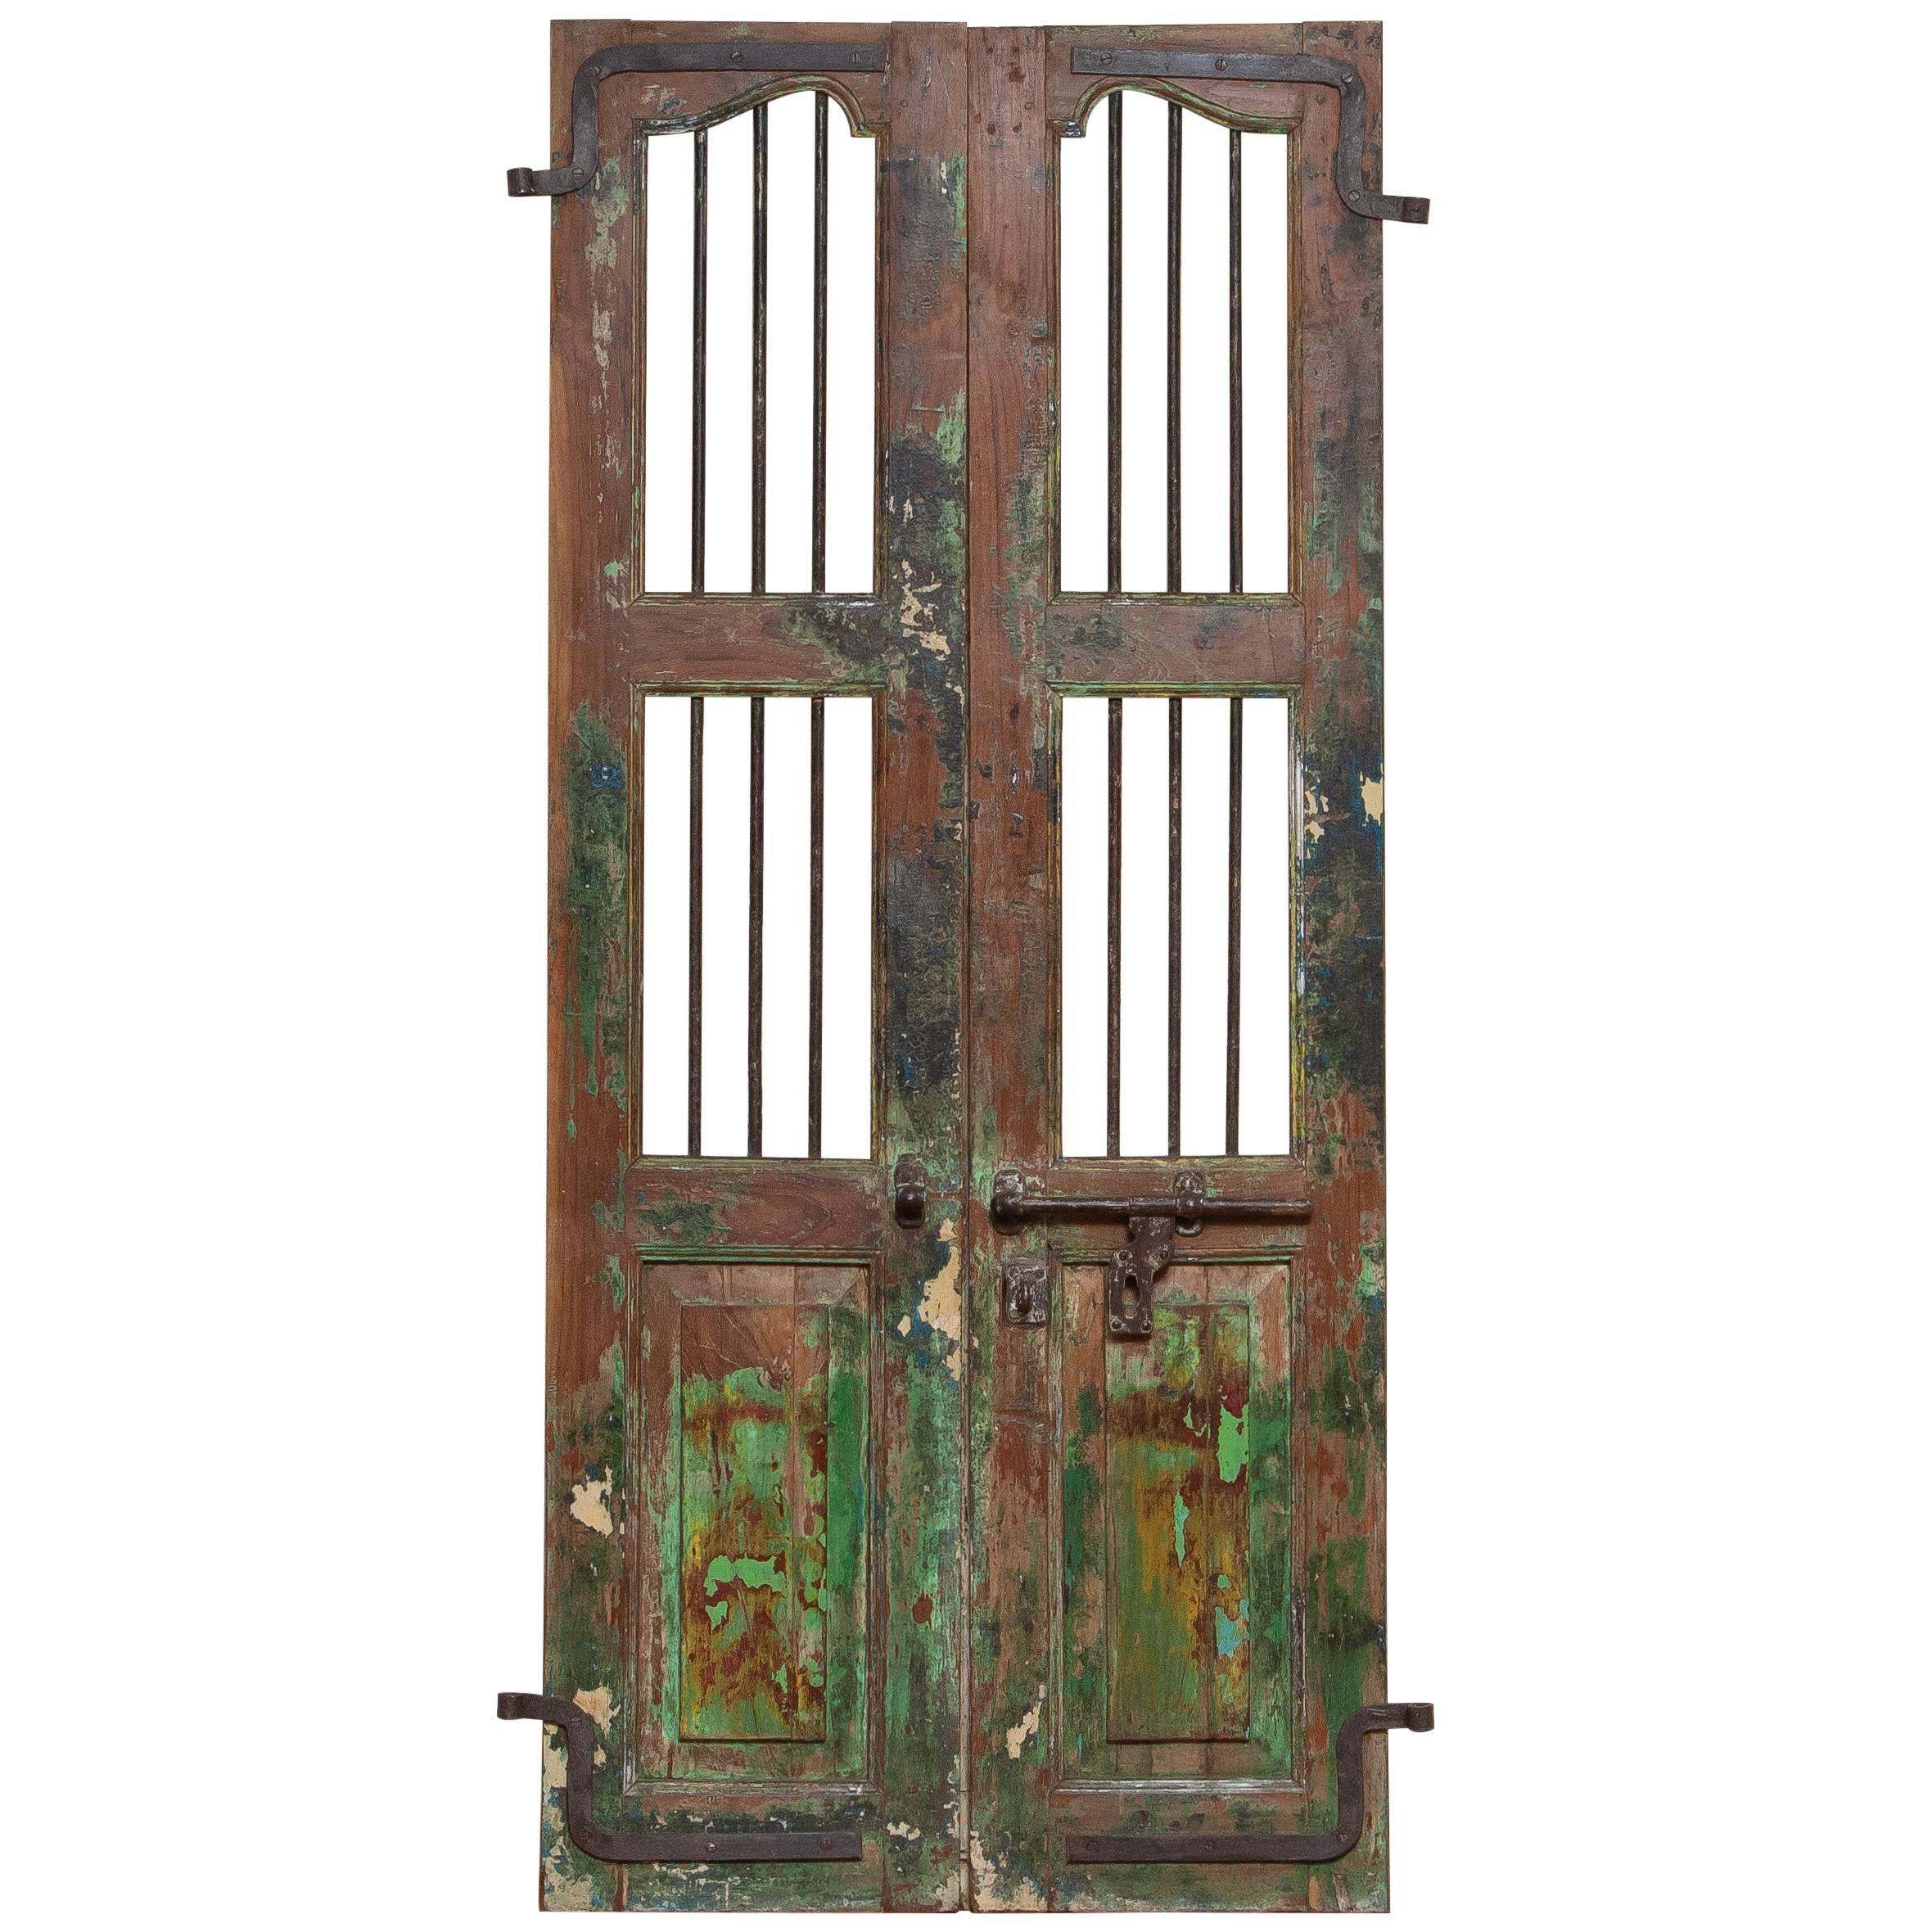 19th Century Pair of Antique Window / Doors Shutters from India with Metal Bars